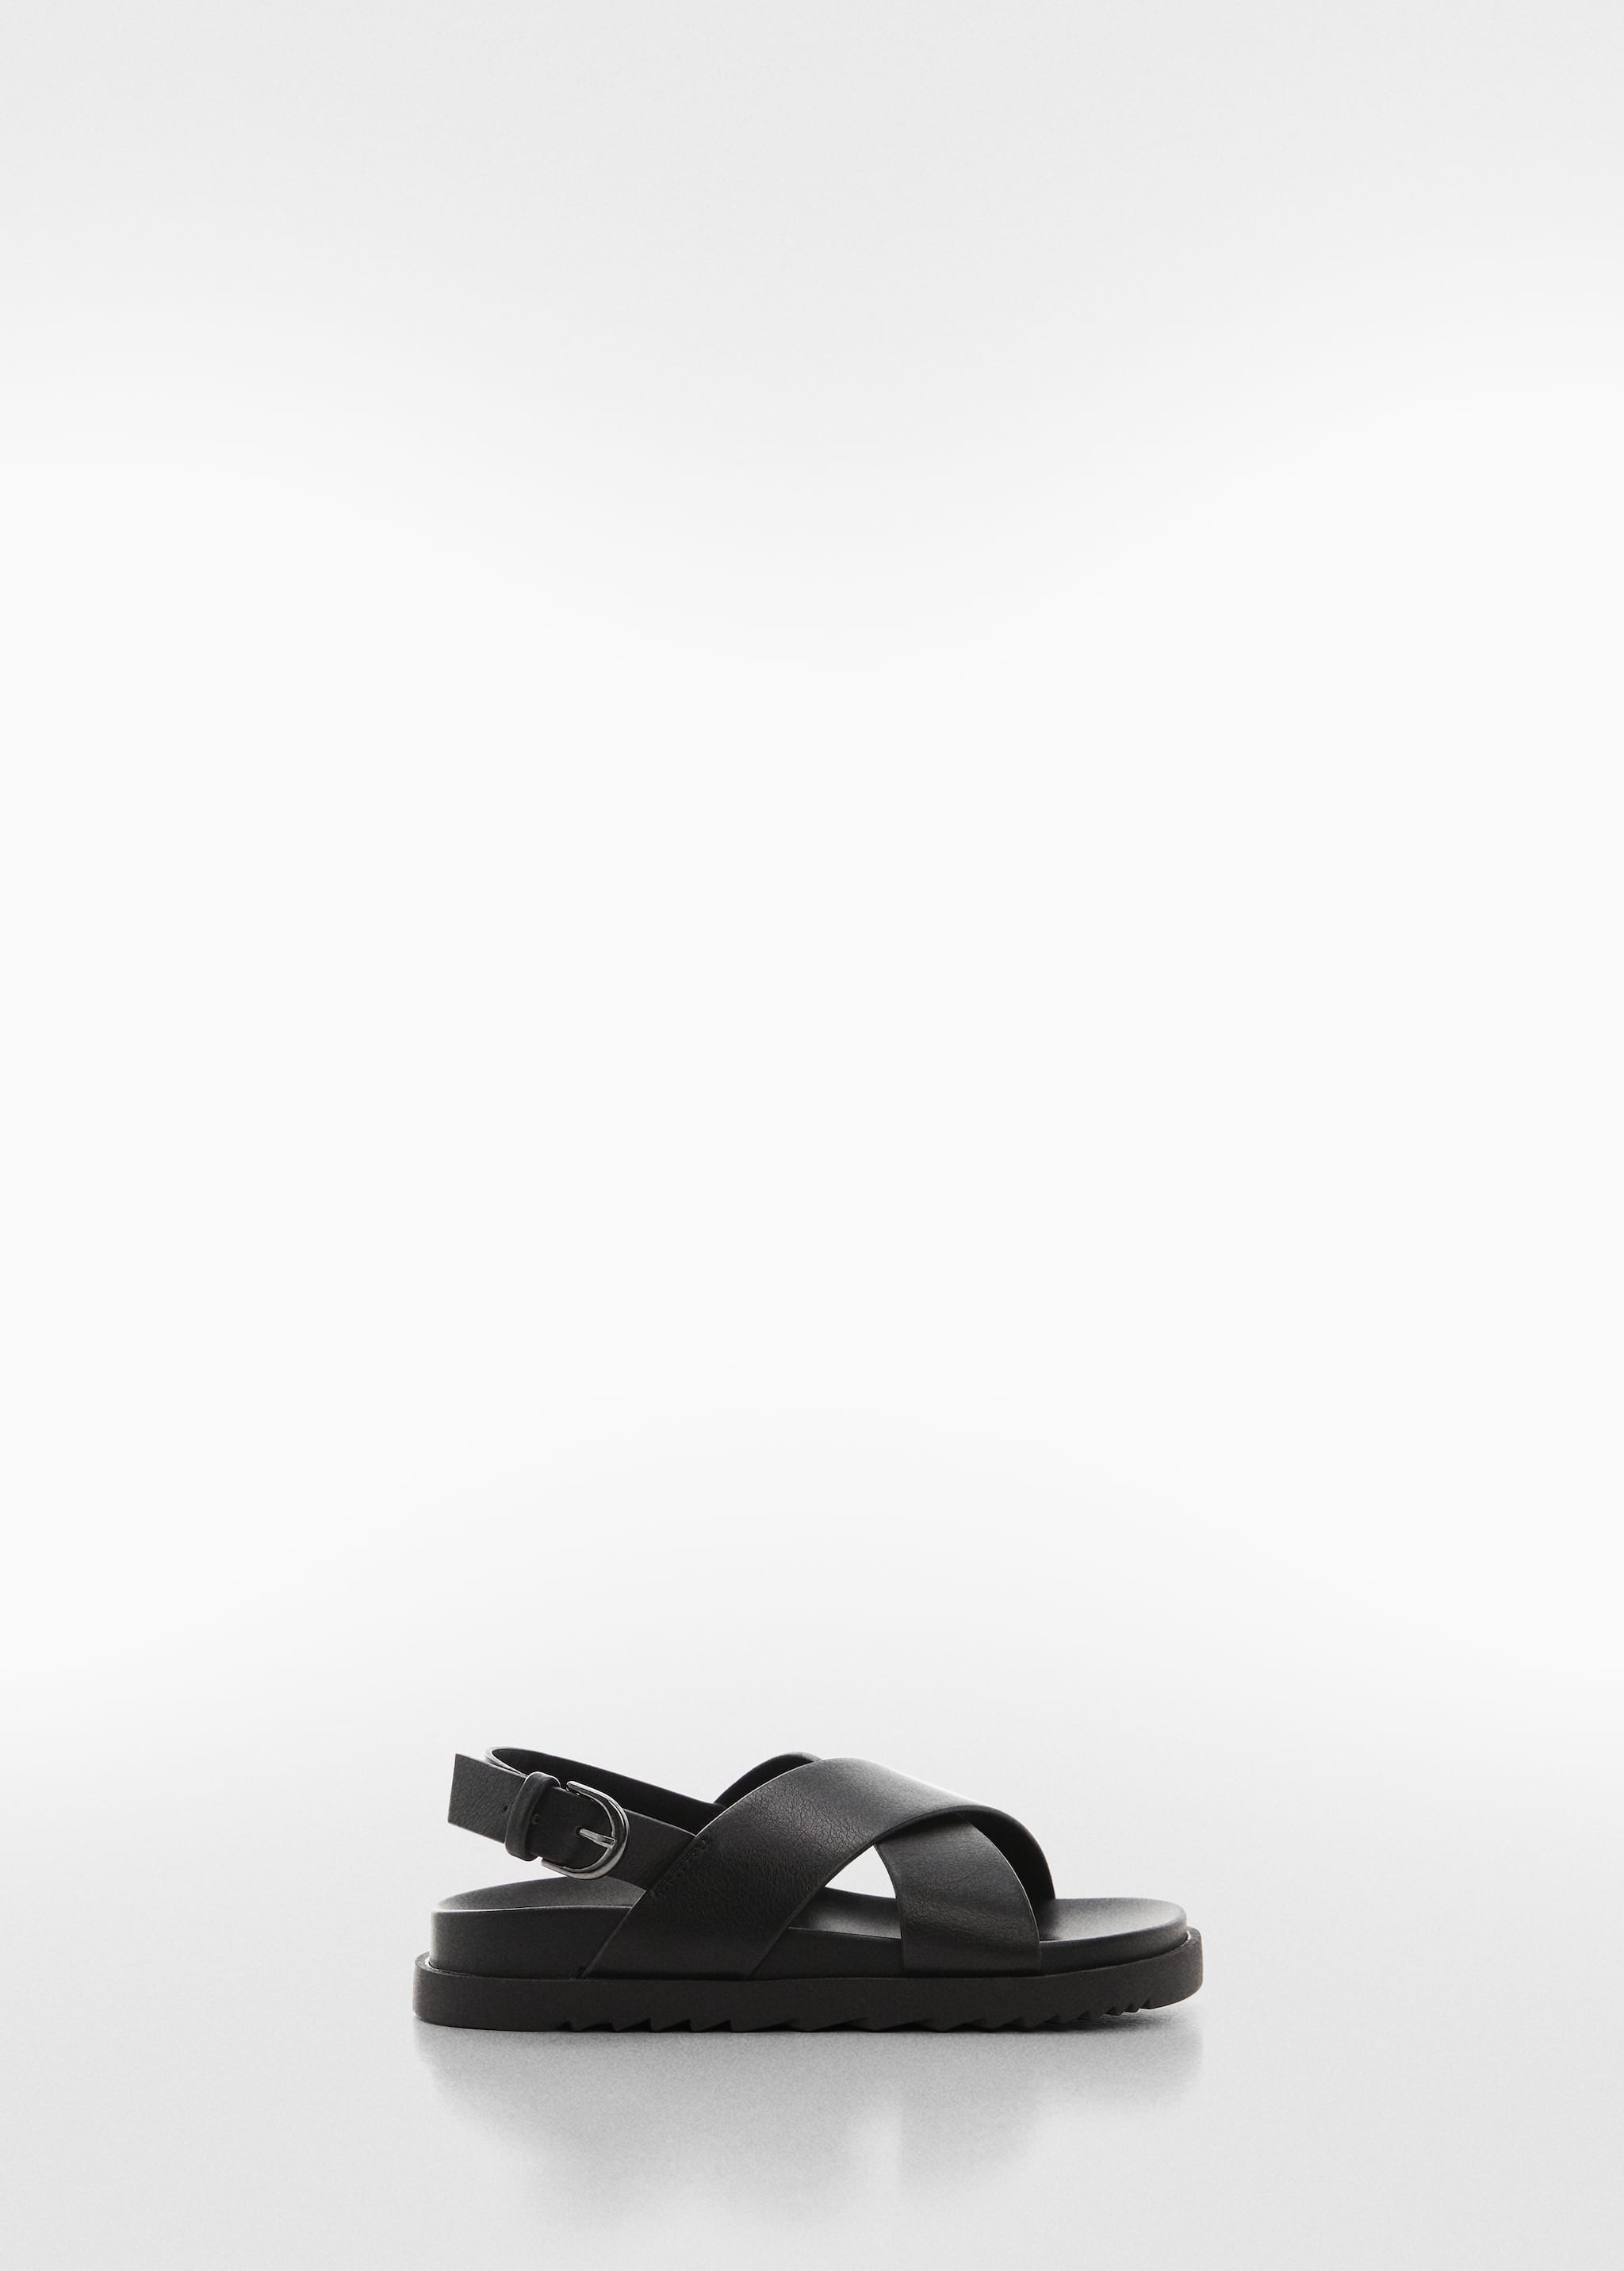 Buckle strap sandals - Article without model